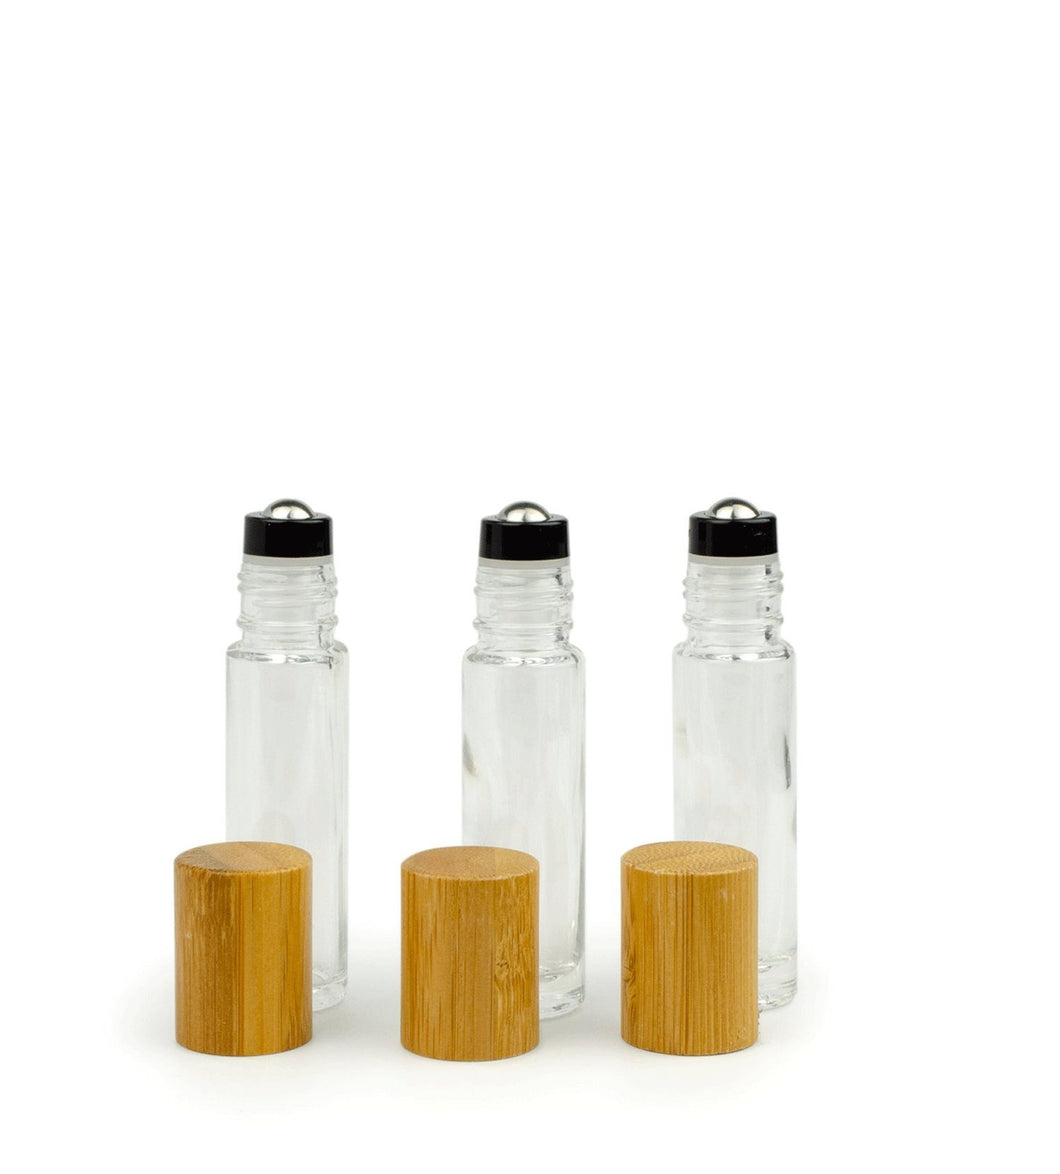 6 Pcs No-Leak DELUXE Steel Rollers! LUXURY 10ml CLeAR Glass Quality Essential Oil Glass Bottles w/ Matte Silver or BAMBOO Caps, Essential Oil